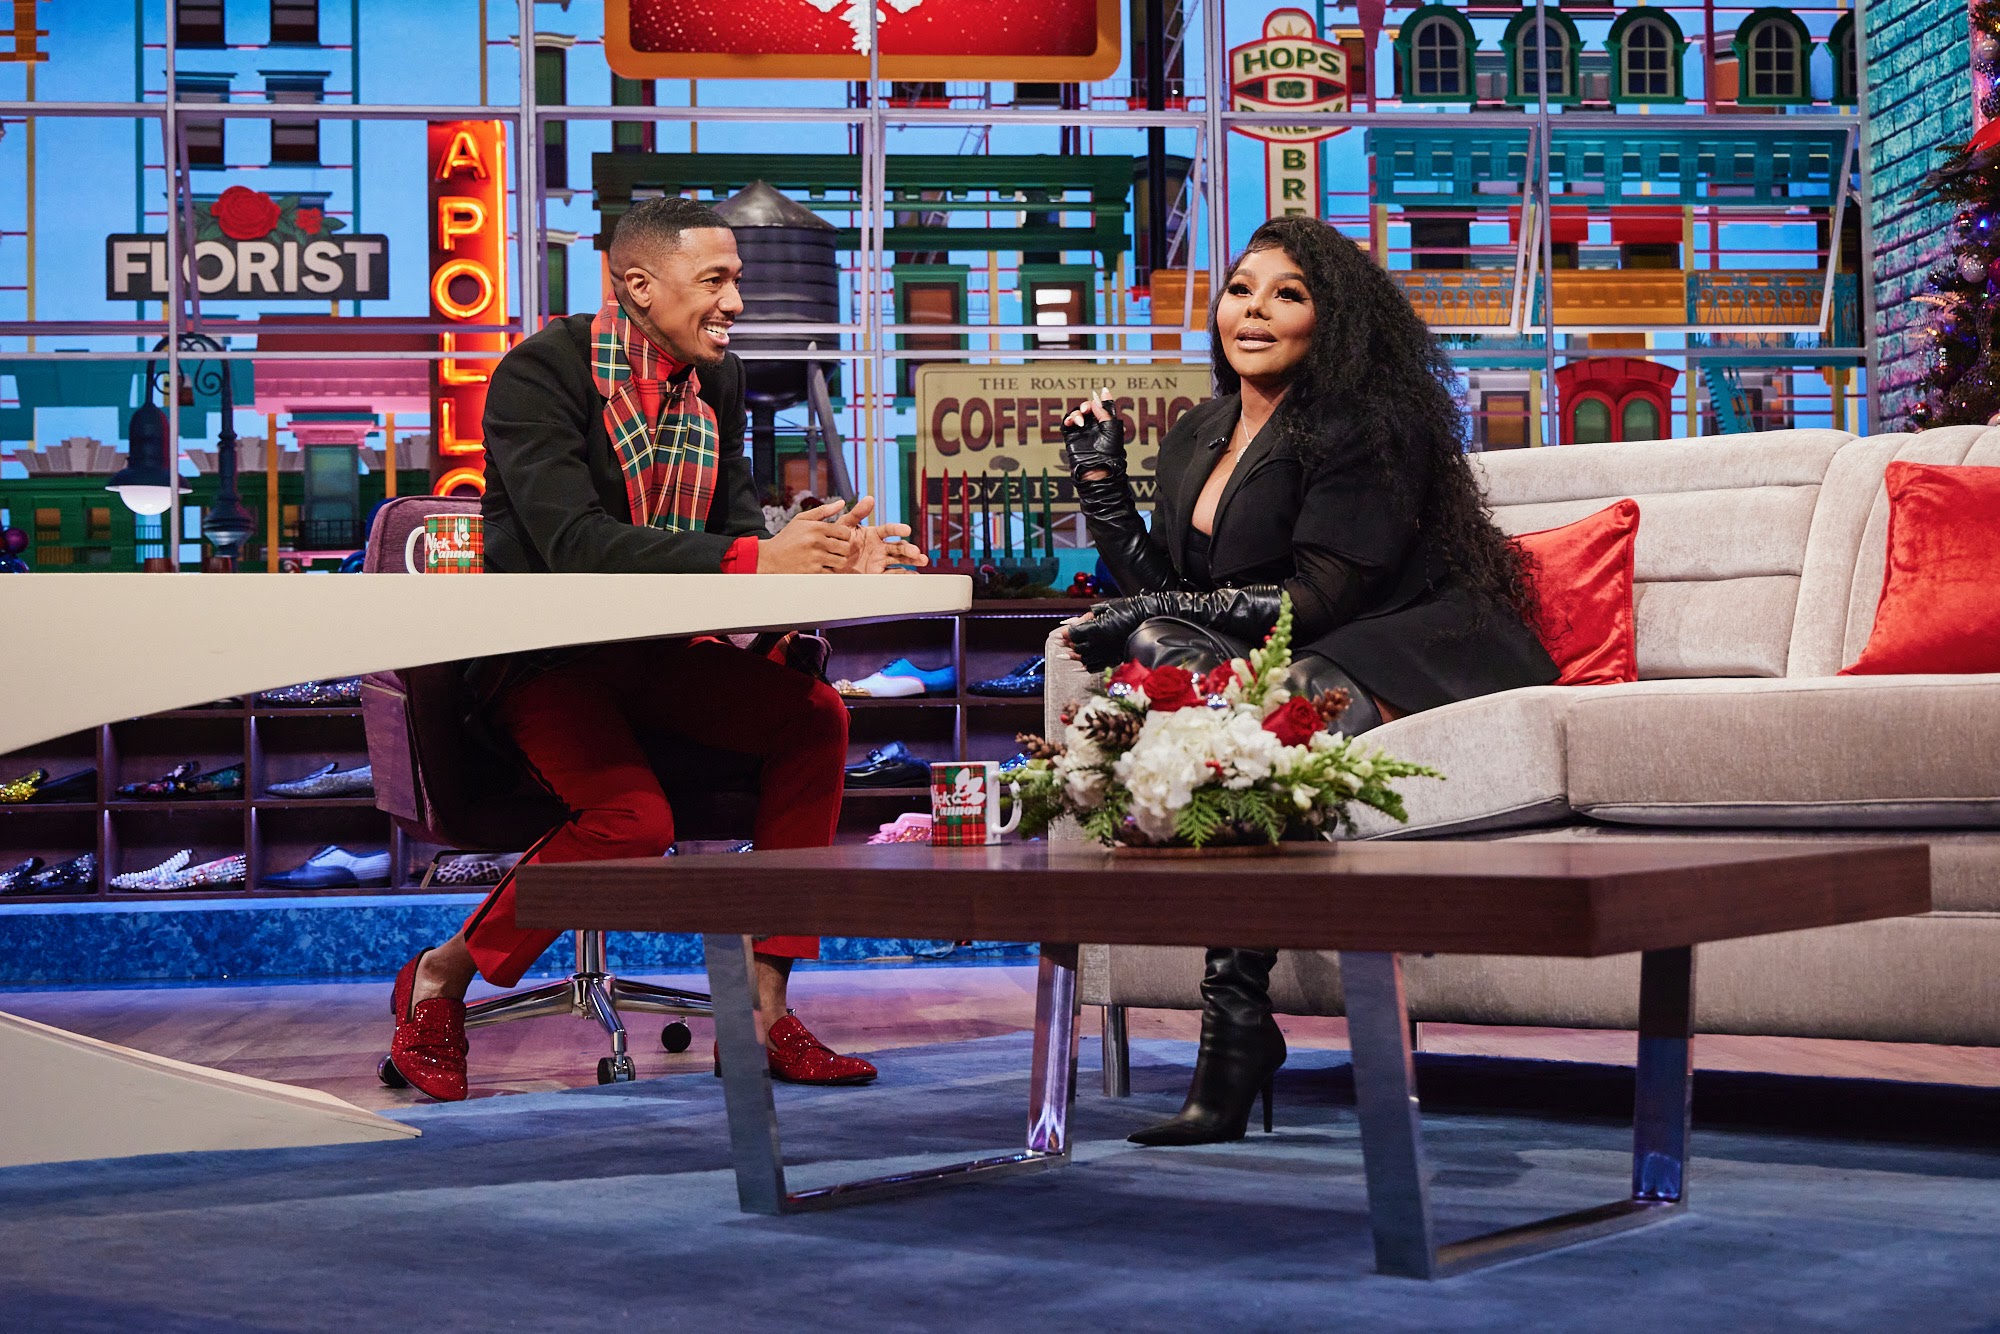 In Case You Missed It: Lil Kim On ‘Nick Cannon Show’